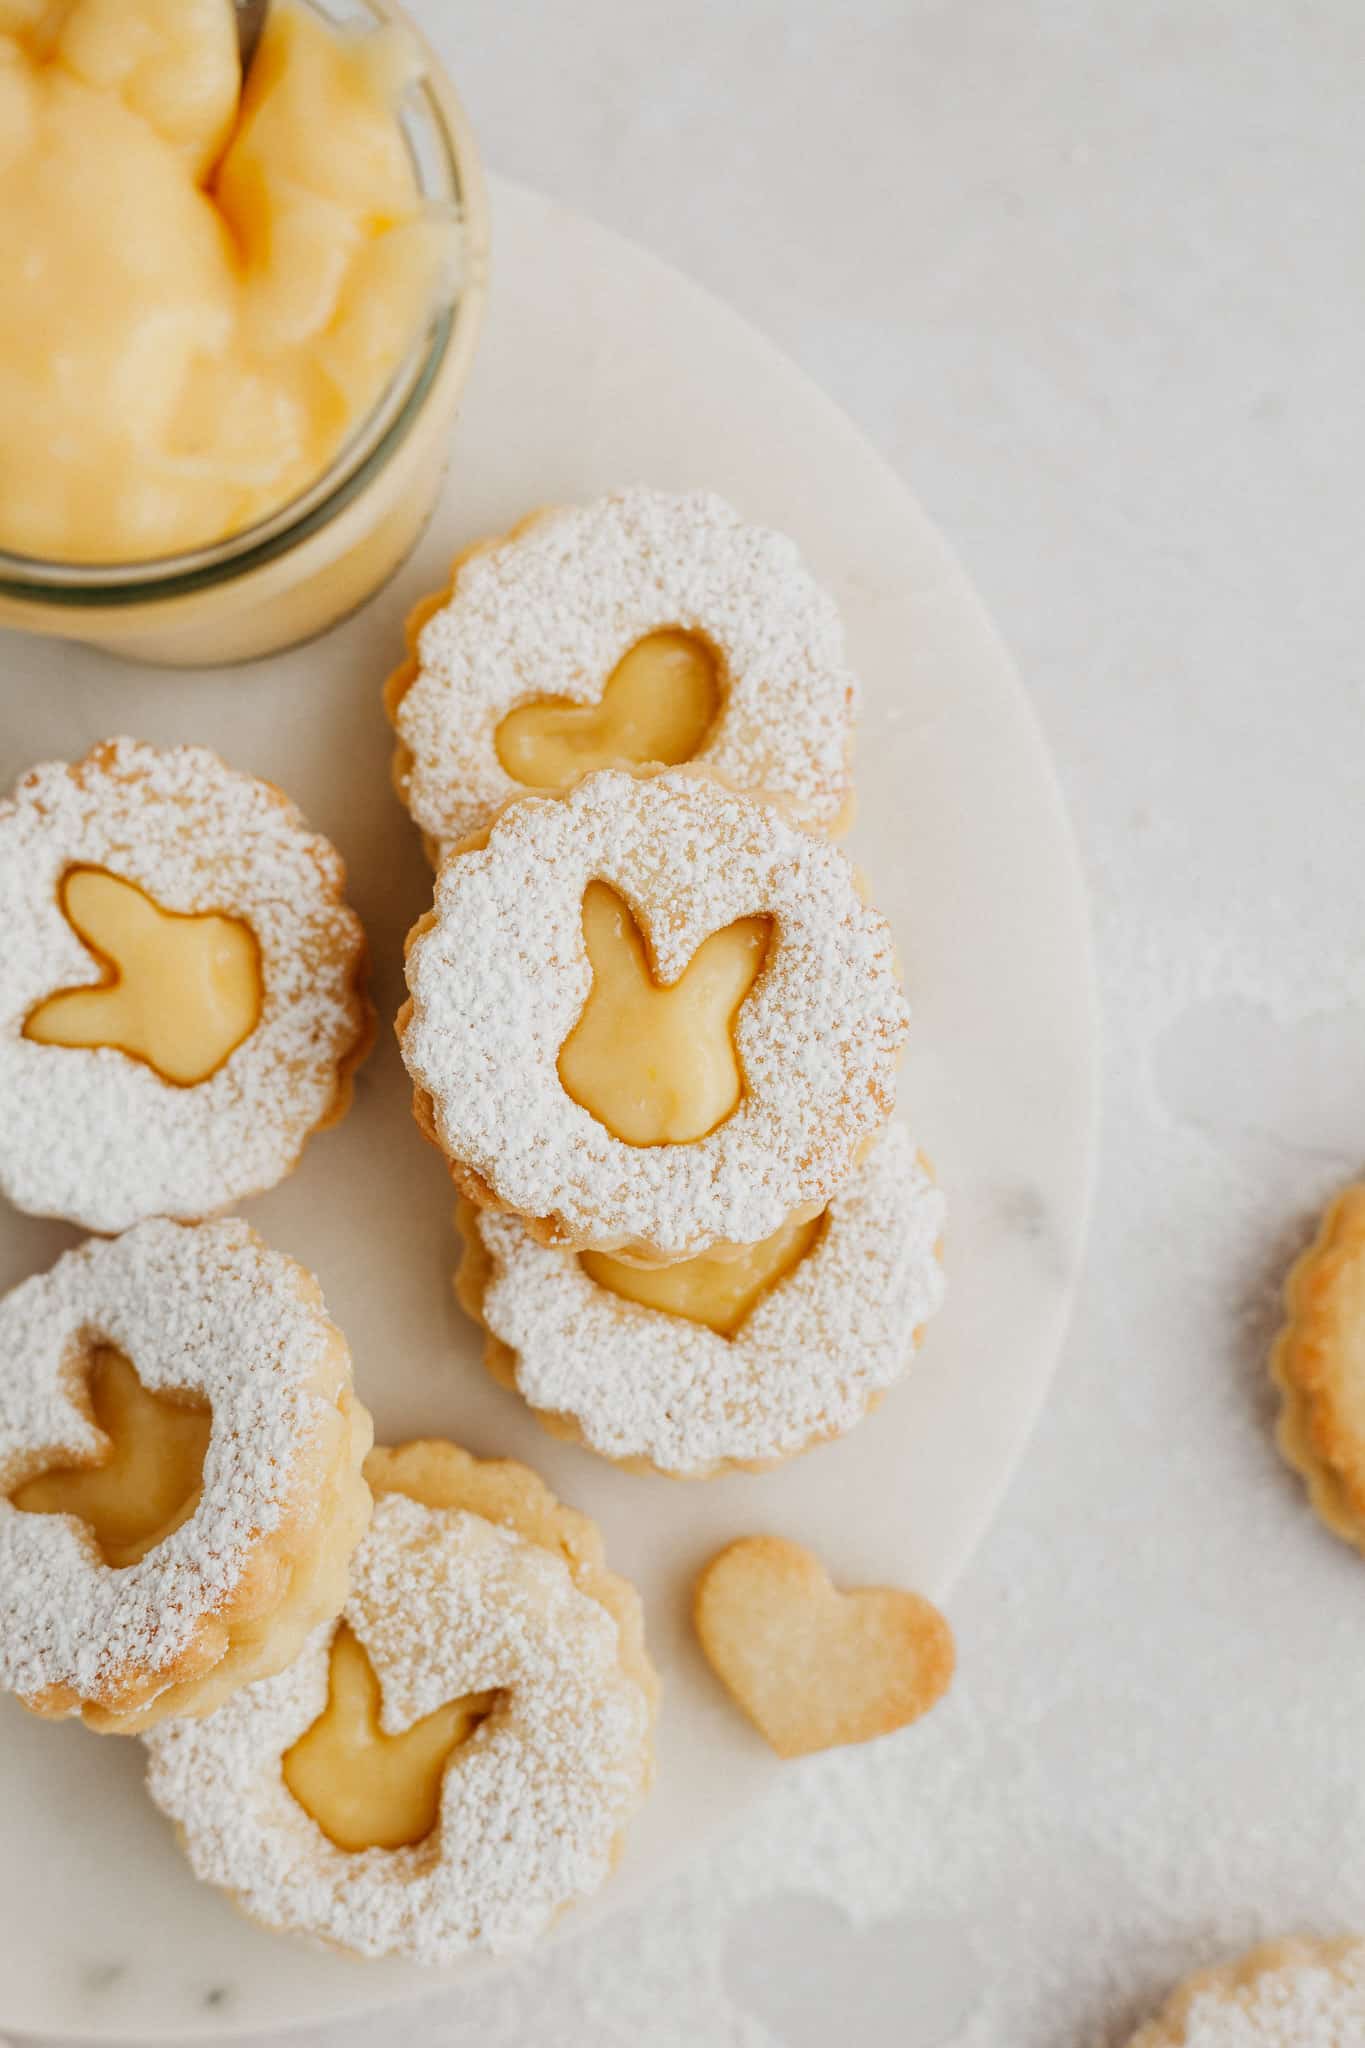 lemon curd cookies with rabbit shaped cutouts on a marble surface.